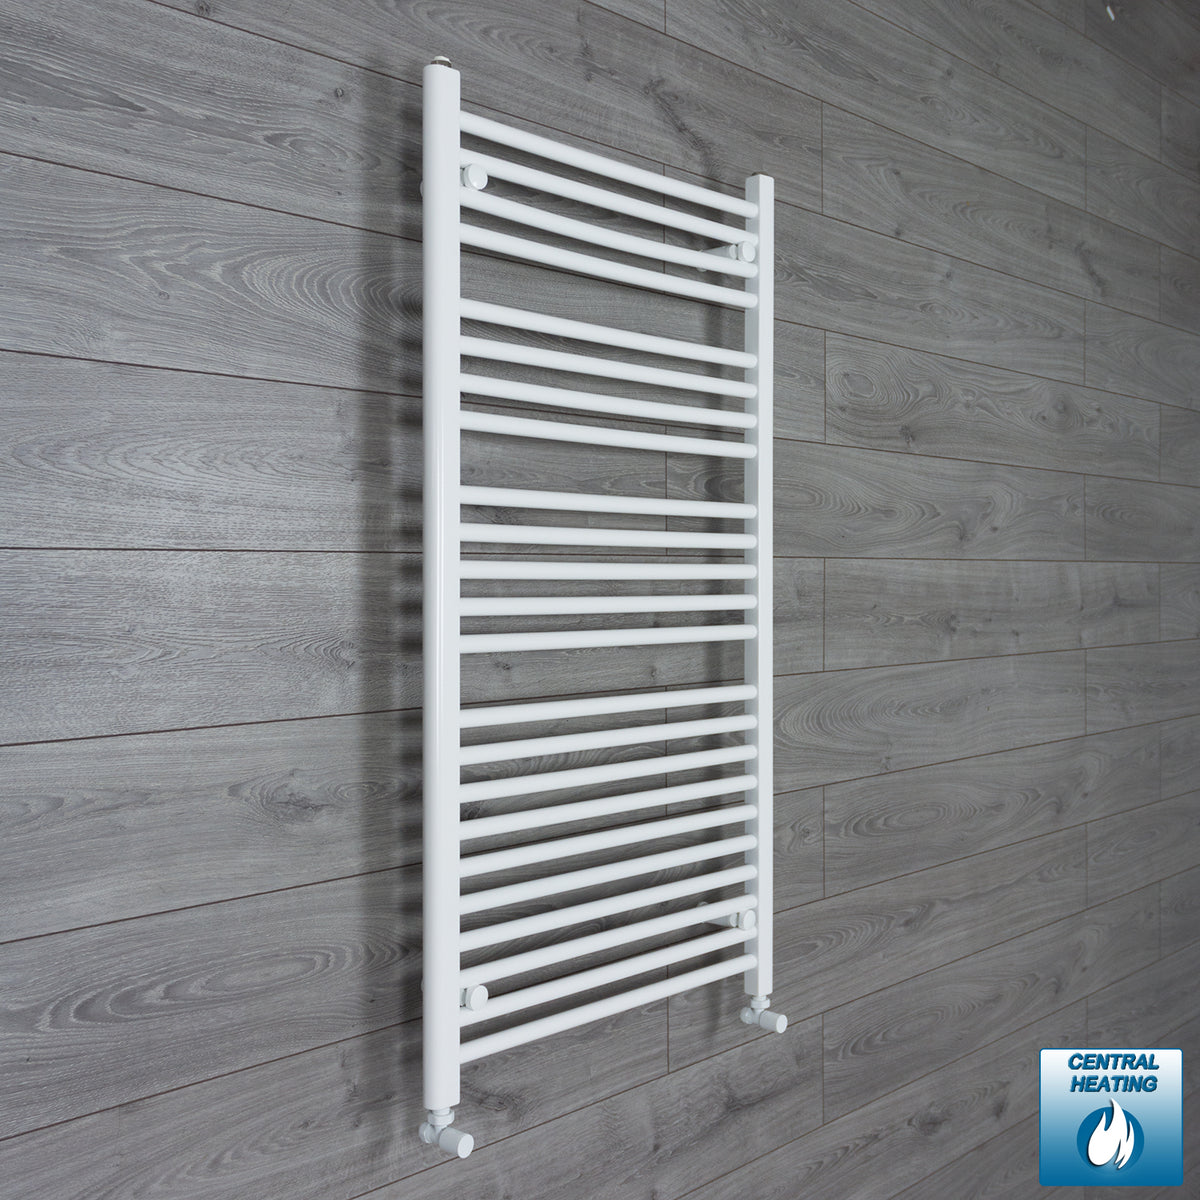 650mm Wide 1200mm High White Towel Rail Radiator With Angled Valve